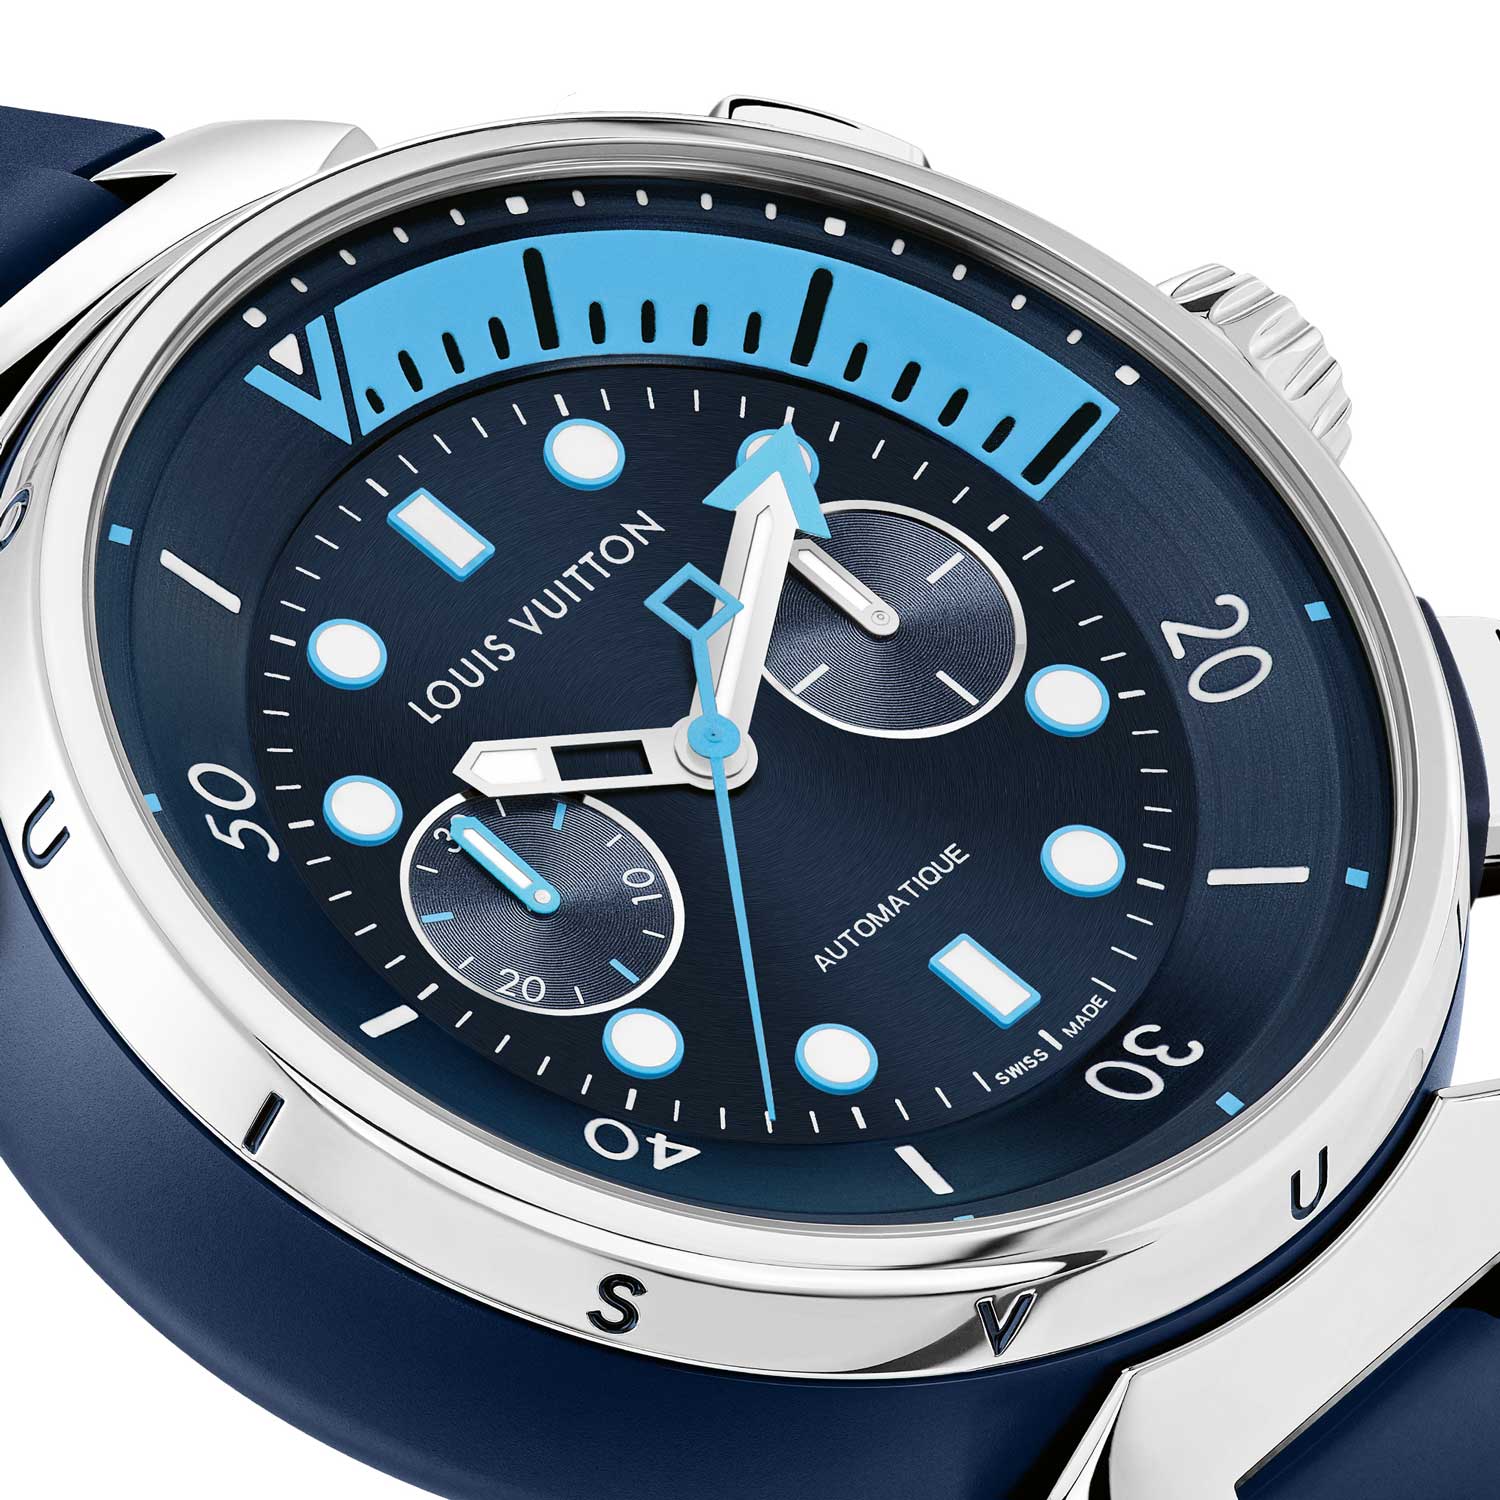 The easy to read and operate chronograph features a 30-minute counter and central chrono seconds